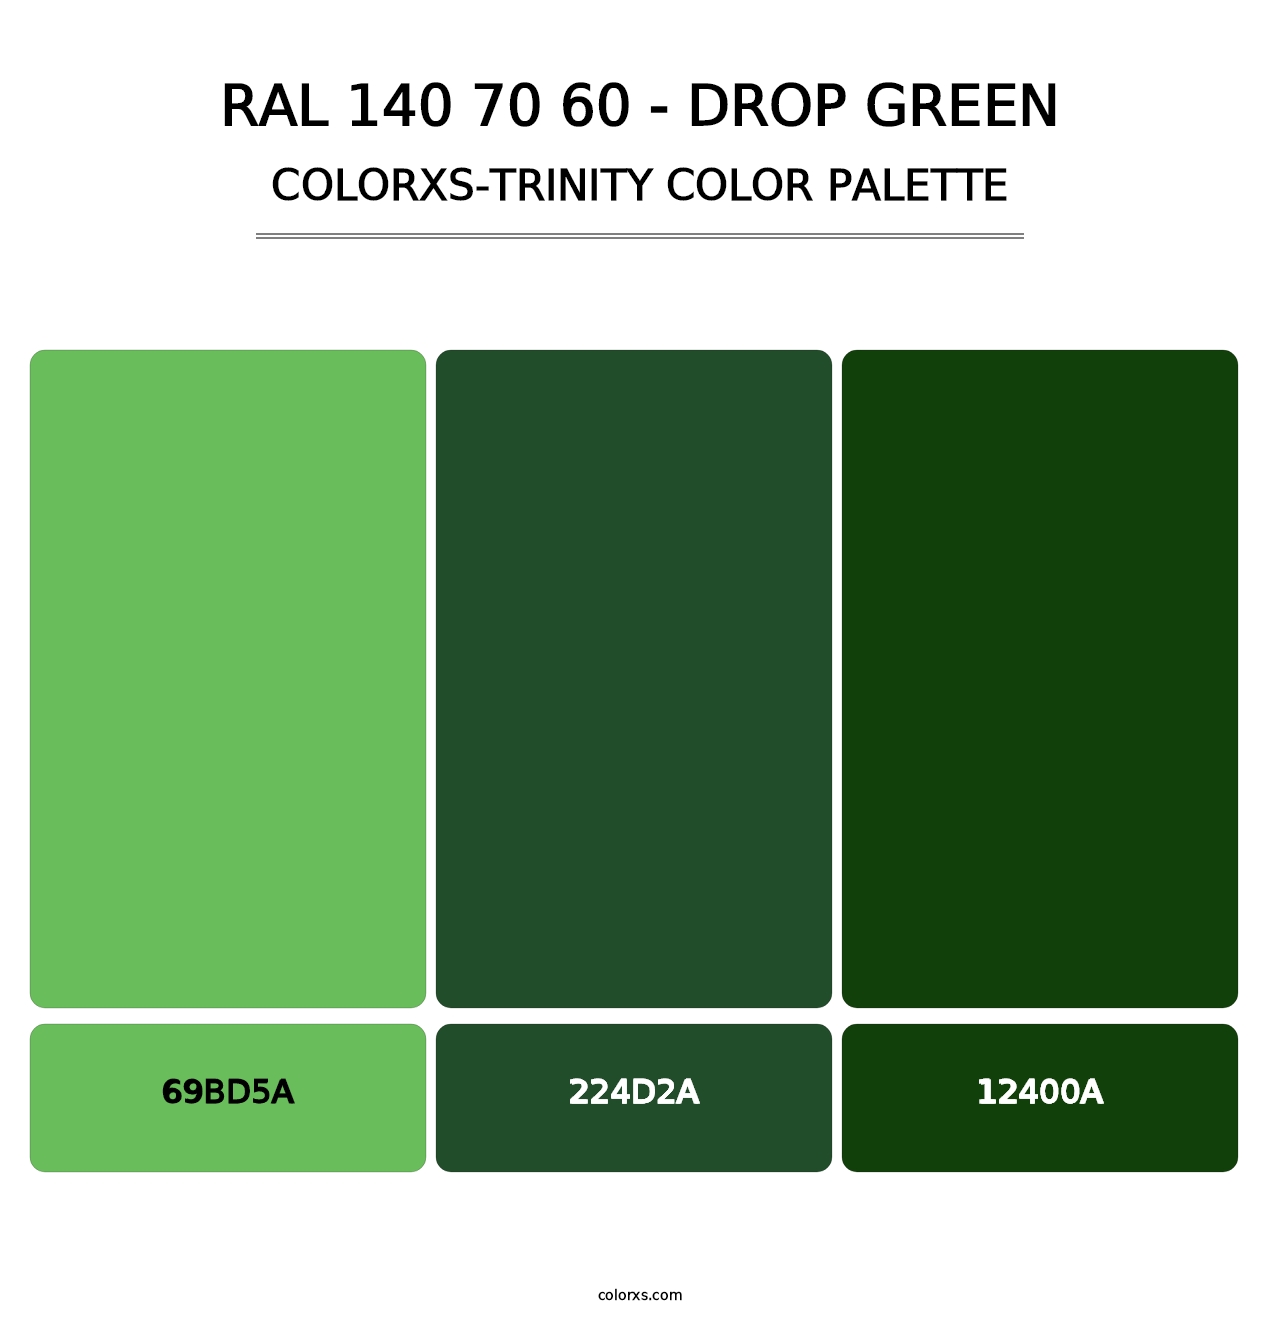 RAL 140 70 60 - Drop Green - Colorxs Trinity Palette